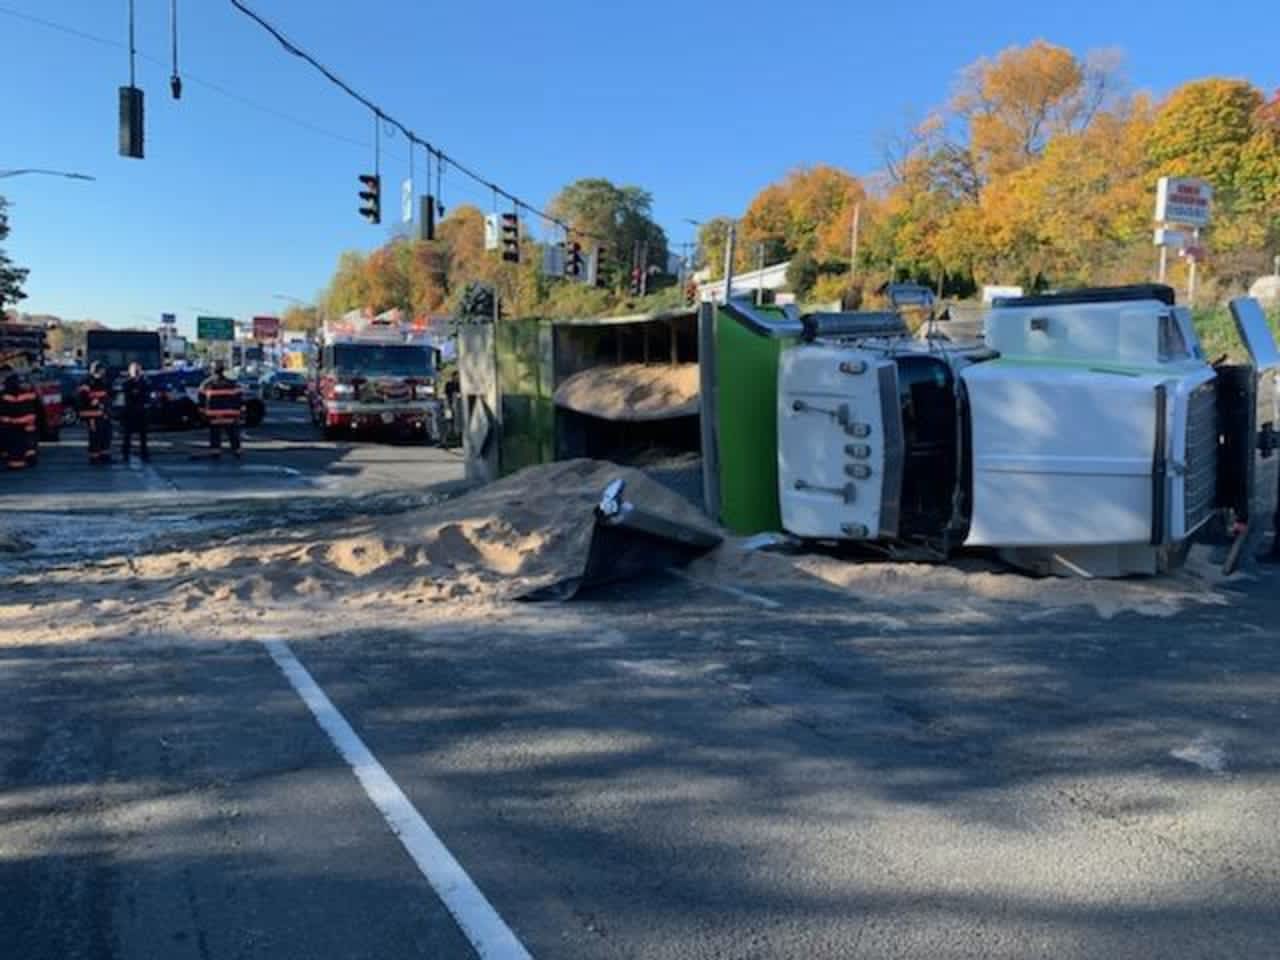 Central Park Avenue northbound in Yonkers has reopened following an overturned construction vehicle.